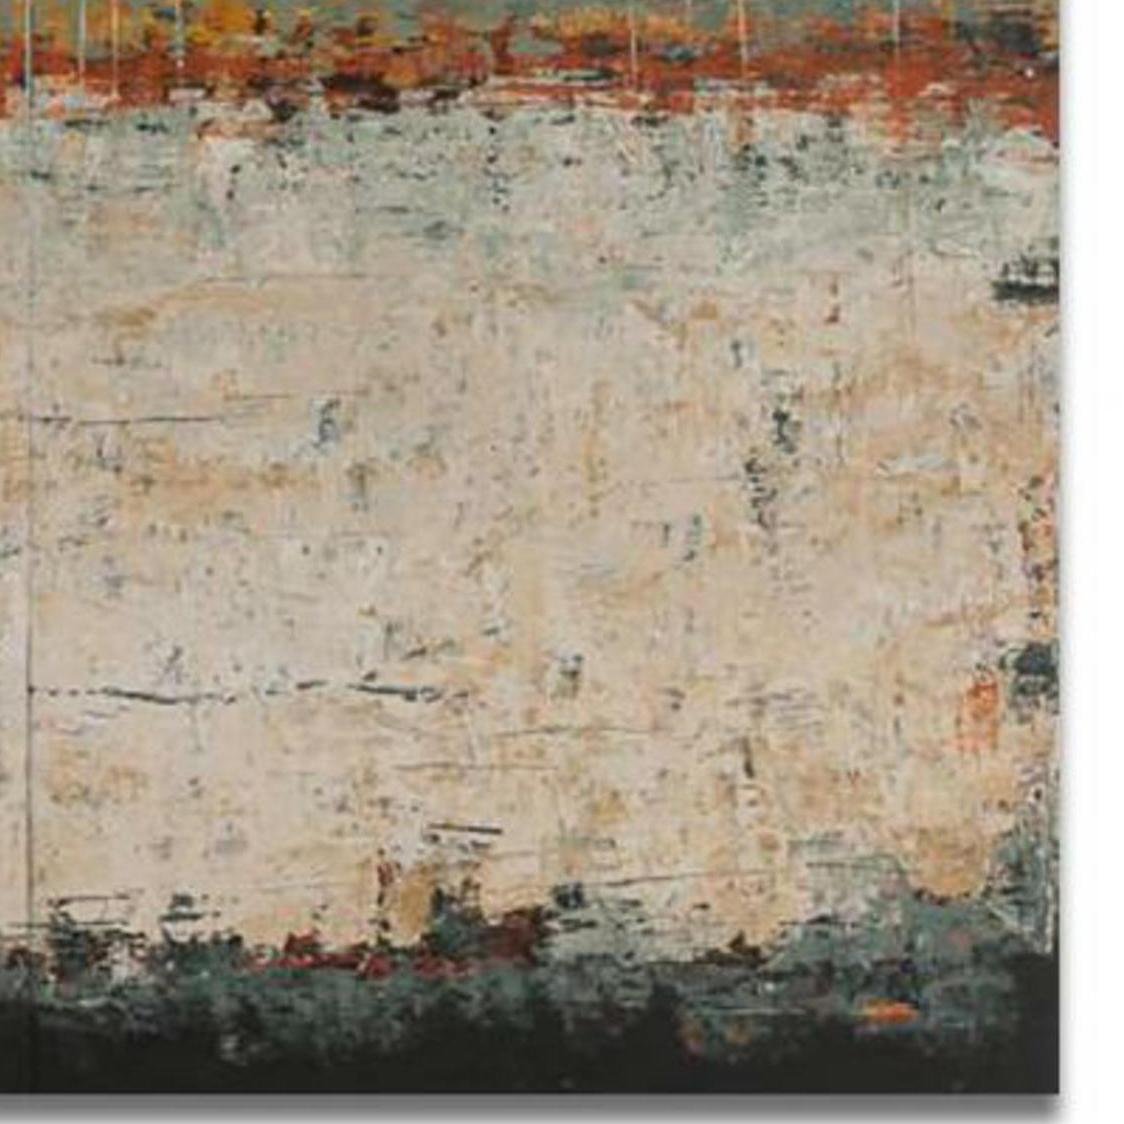 Monterey by artist Patricia Oblack and a brown, grey, turquoise, and black contemporary abstract mixed media on panel that measures 48 x 64 and is priced at $7,400.

“Presently, I use color - layers and layers if color and texture to create and